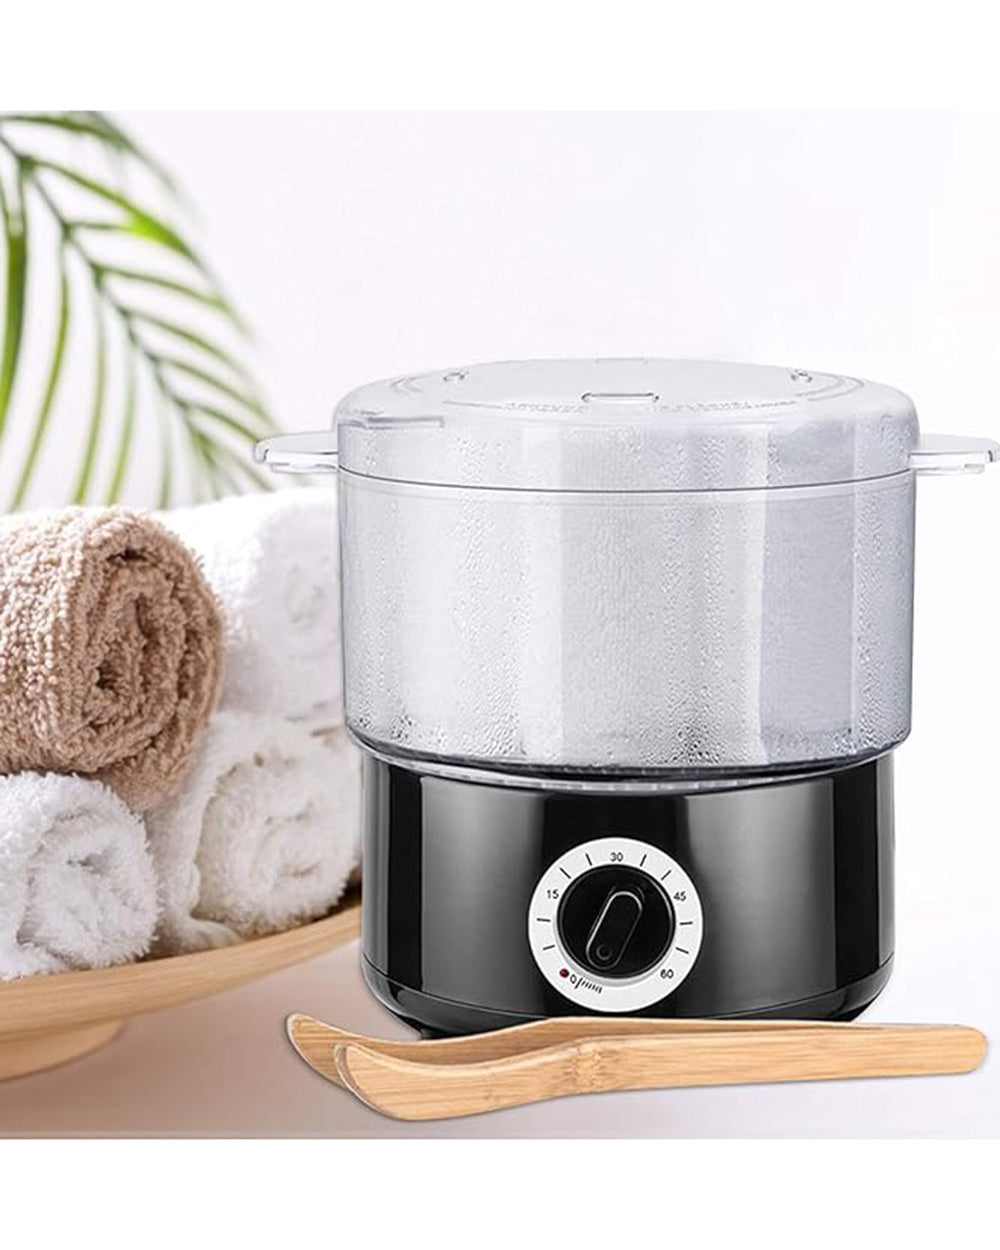 KKTECT Quick Heating Towel Steamer for Home Beauty Salon